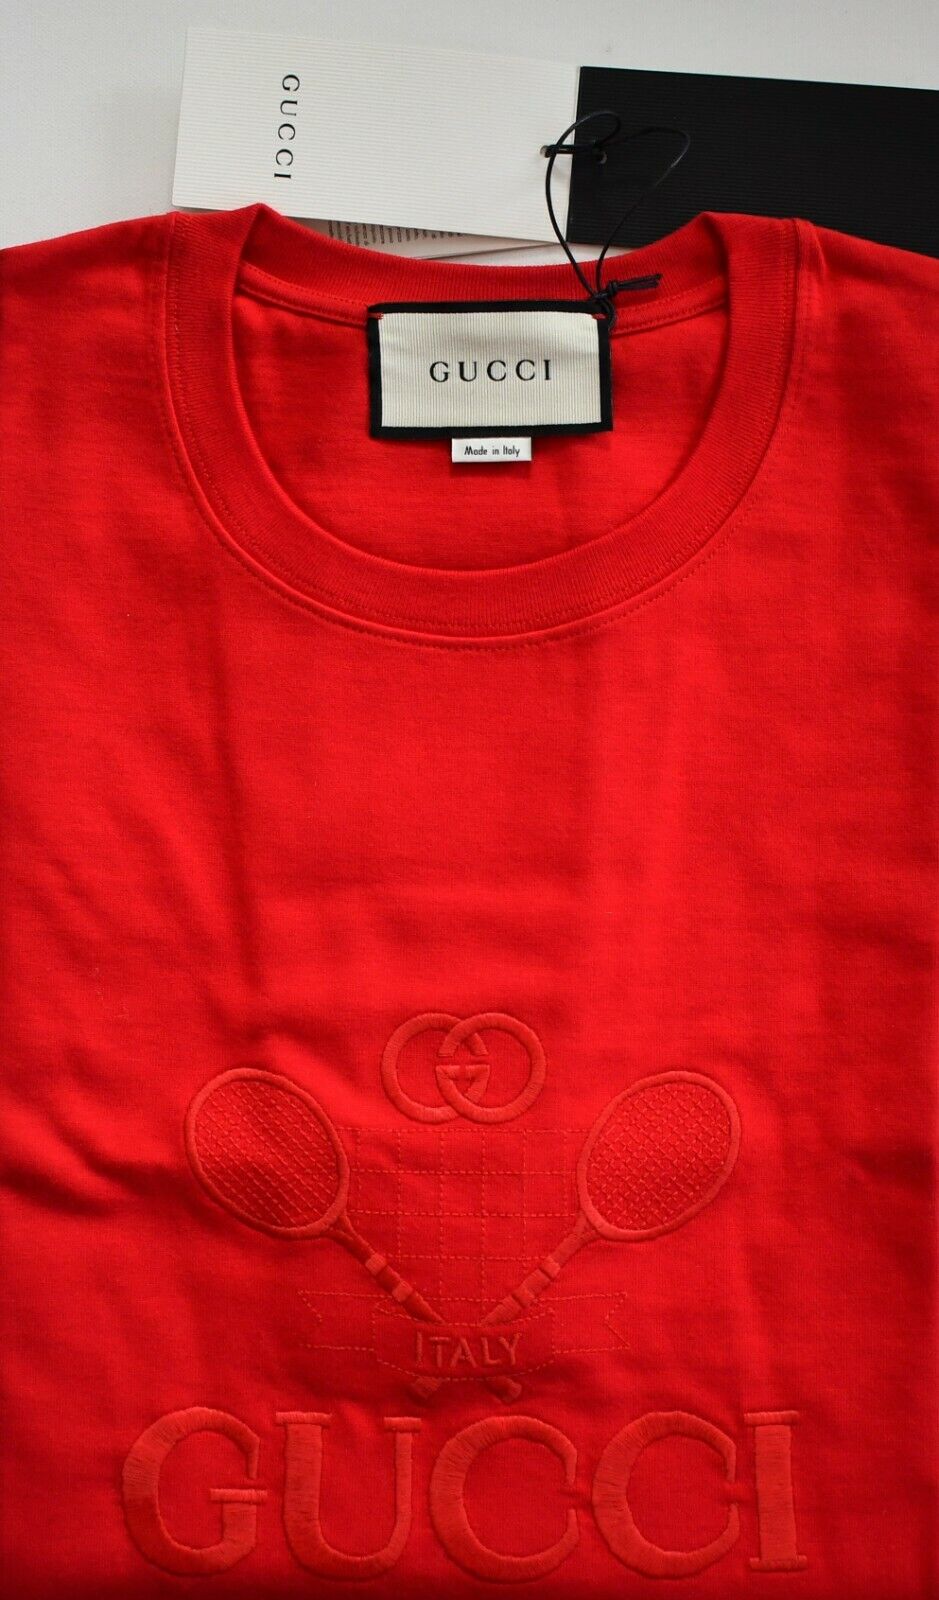 🆕️ Authentic GUCCI TENNIS Embroidered Red 100% COTTON Men's T-Shirt Tee XL